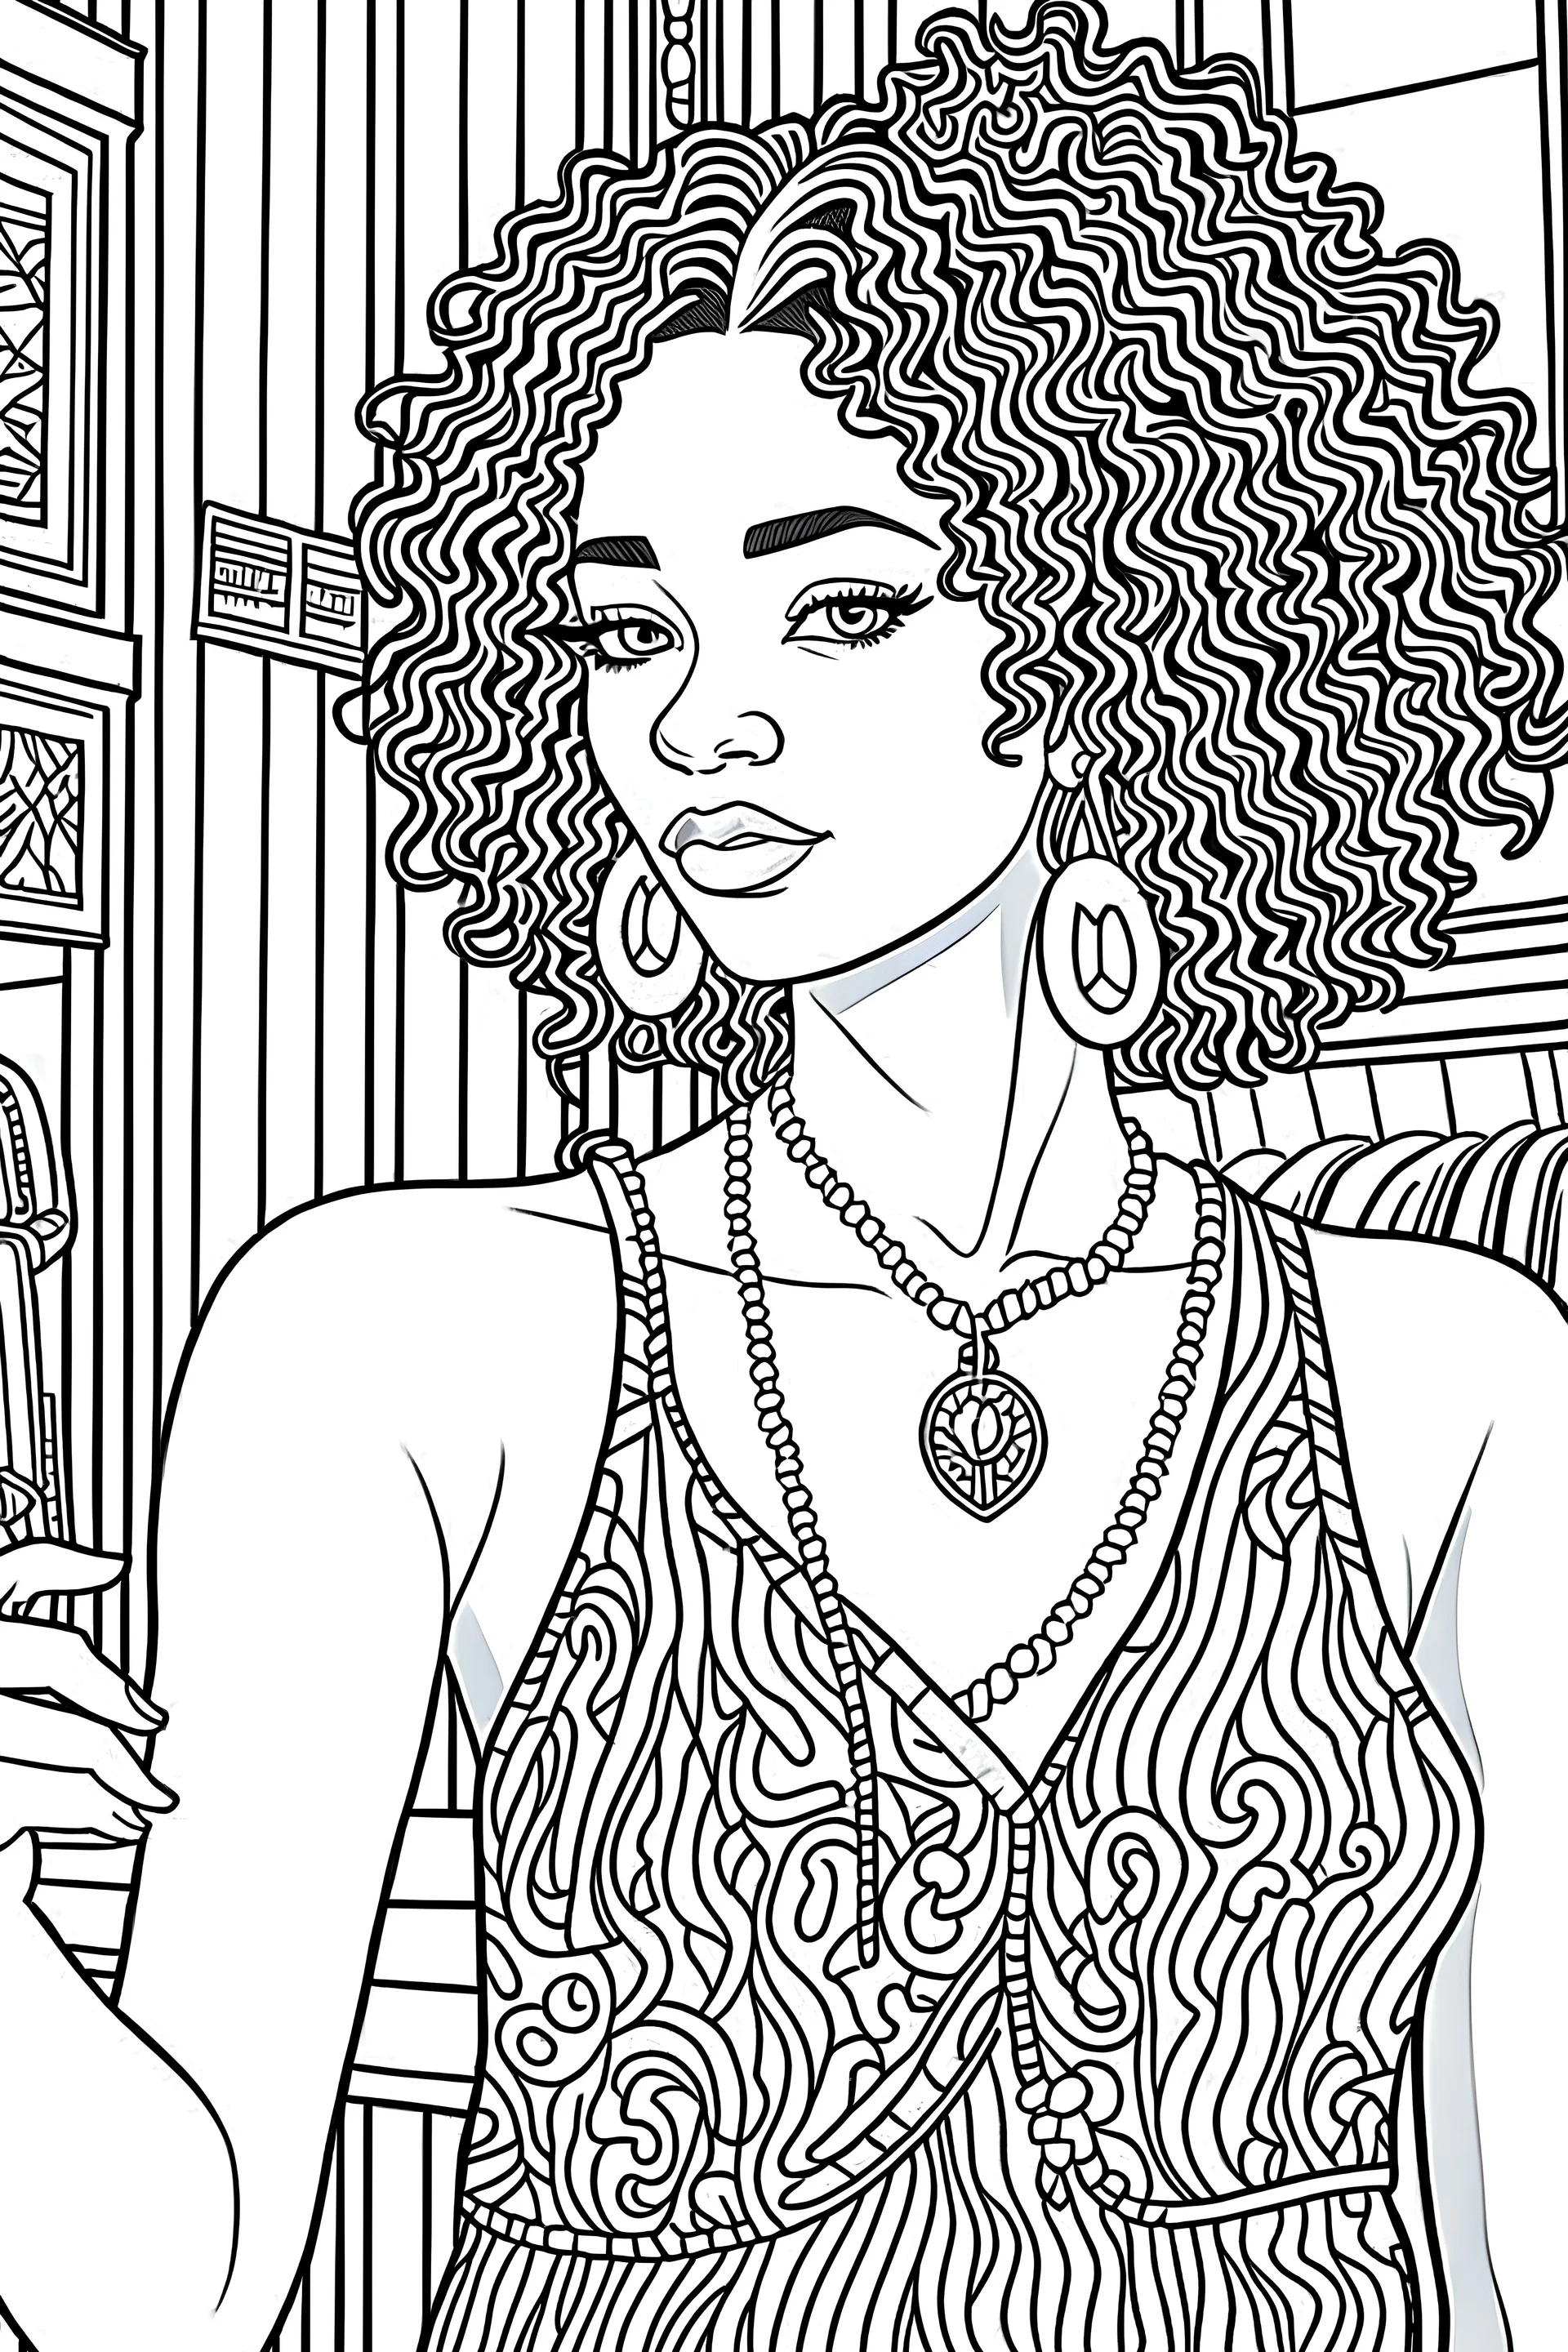 closeup Black & White coloring page beautiful Black woman white skin afro curly hair headband, flowy sundress getting ready to go out stylish dressing room, vanity table, clothing rack of stylish outfits. Art deco style, ultra detailed, inspired by Jamie mckelvie comic art, by jen bartel, Poster, 2D vector illustration, Vector art clean coloring book page, coloring book illustration, CLEAN LINE ART, FINE LINE ART, only draw outlines